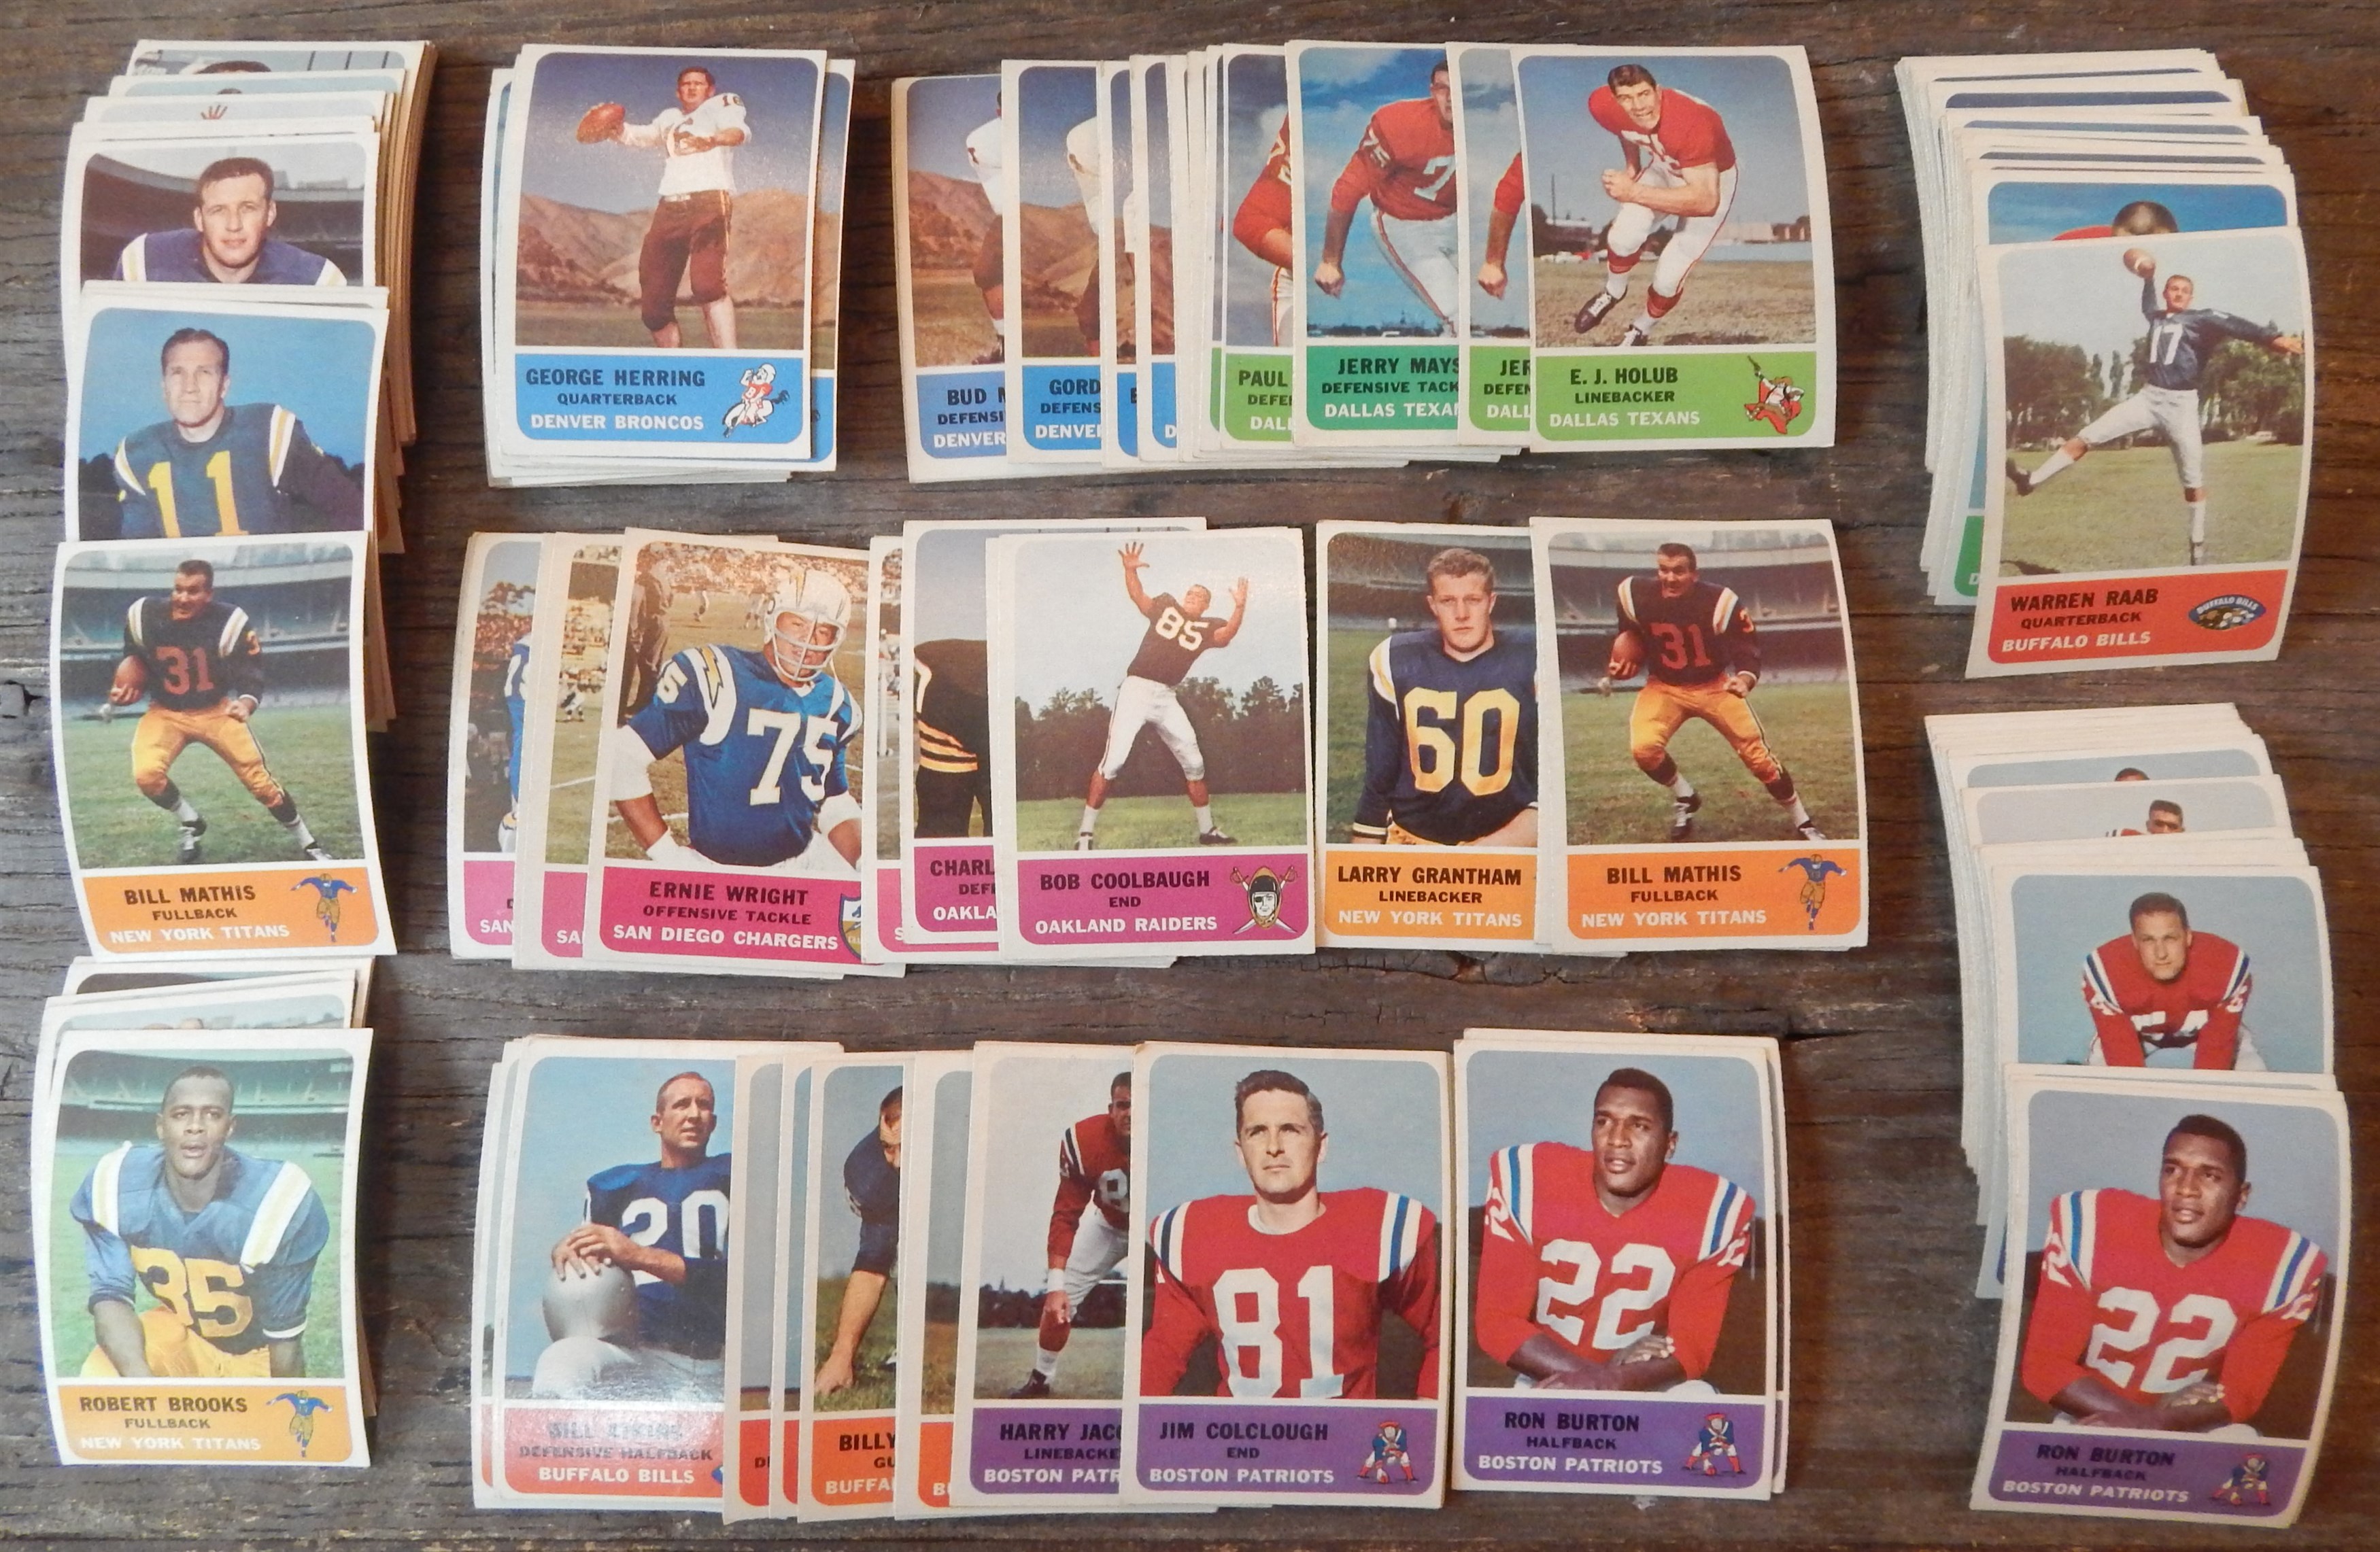 Baseball and Trading Cards - 1962 Fleer Football Collection of 400 Cards